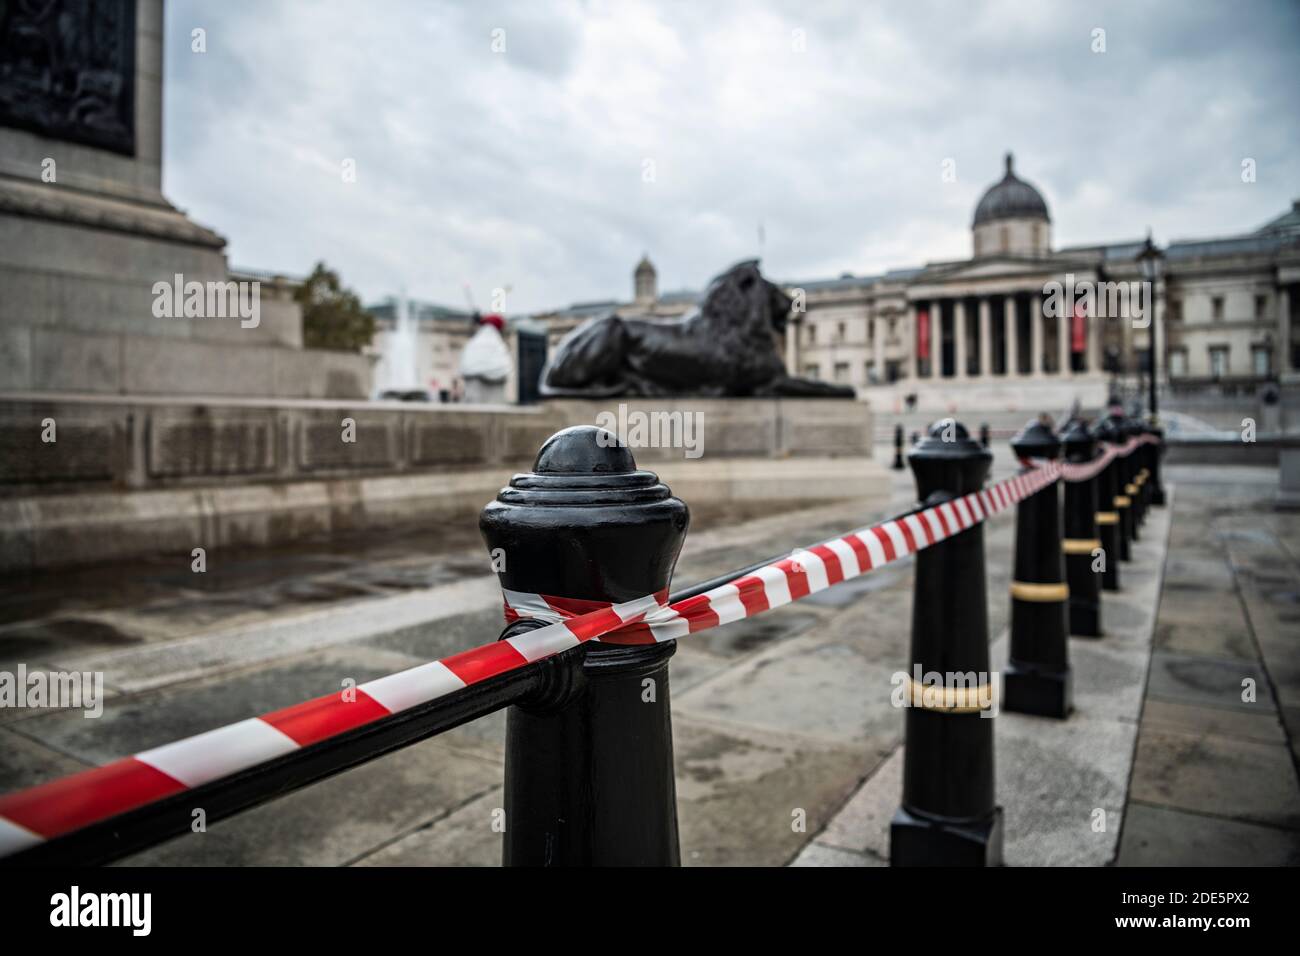 Trafalgar Square lions taped off for health and safety and social distancing in Covid-19 Coronavirus lockdown in London, UK, Europe, with quiet, empty streets in Central London Stock Photo